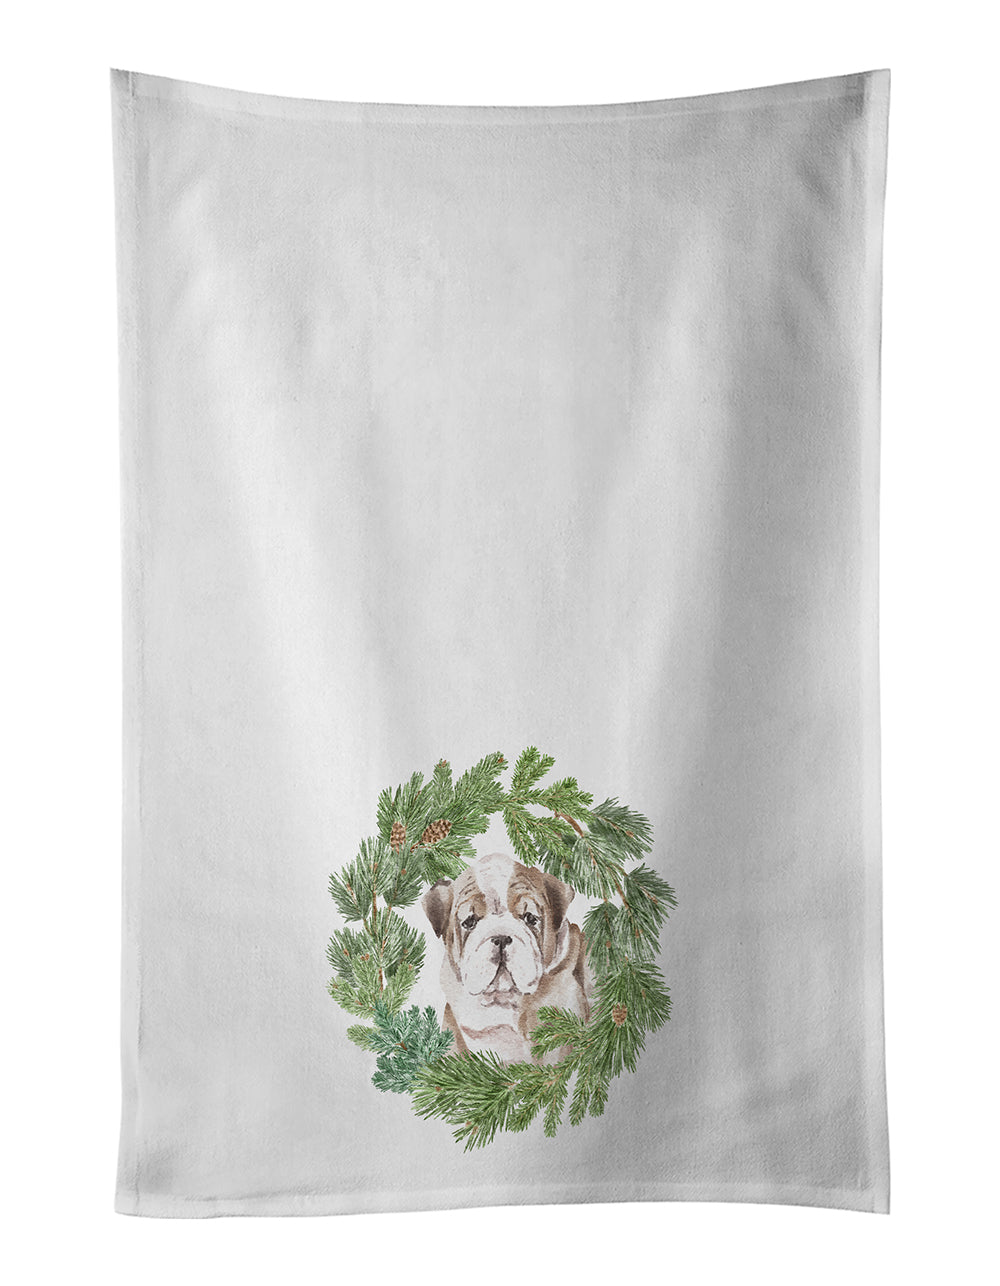 Buy this Bulldog Puppy Fawn Brindle Christmas Wreath White Kitchen Towel Set of 2